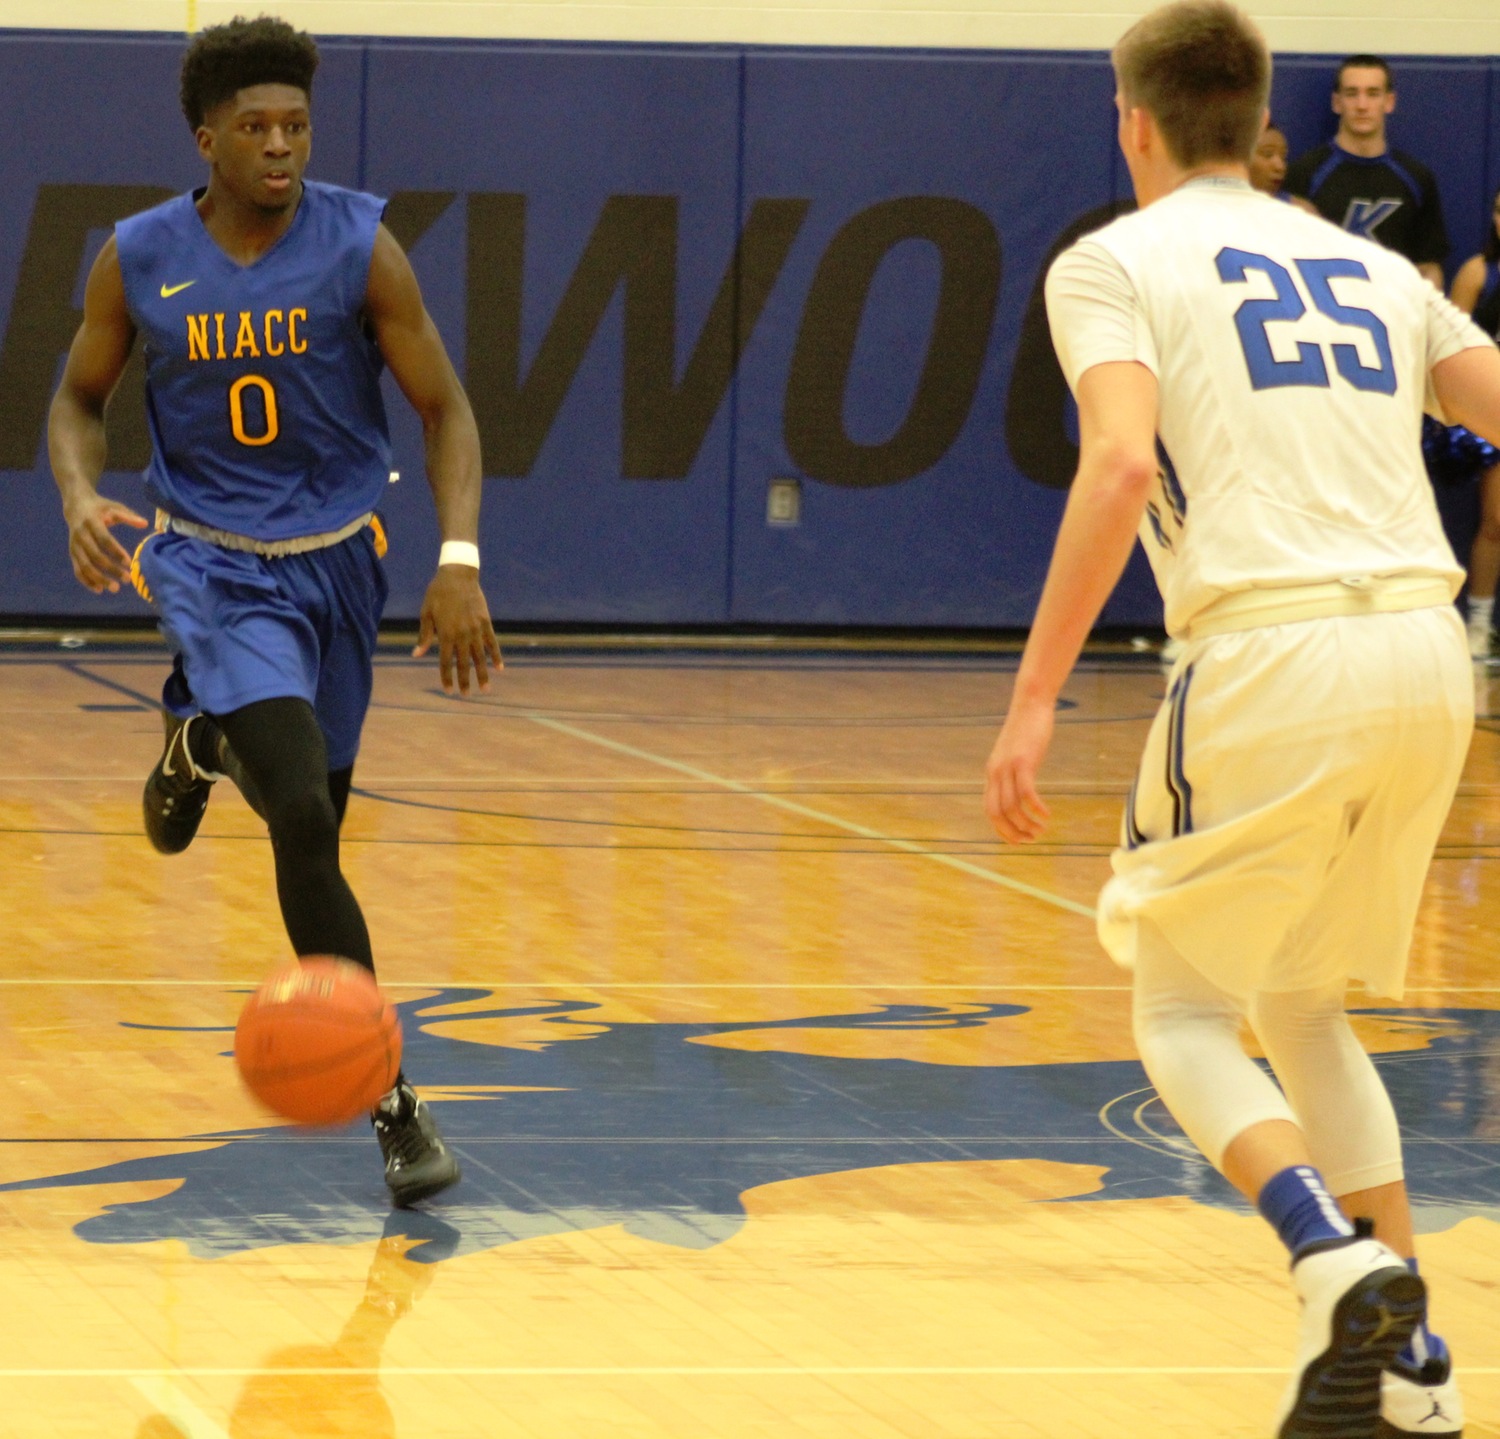 NIACC's James Harris brings the ball up the court in Saturday's game at Kirkwood.